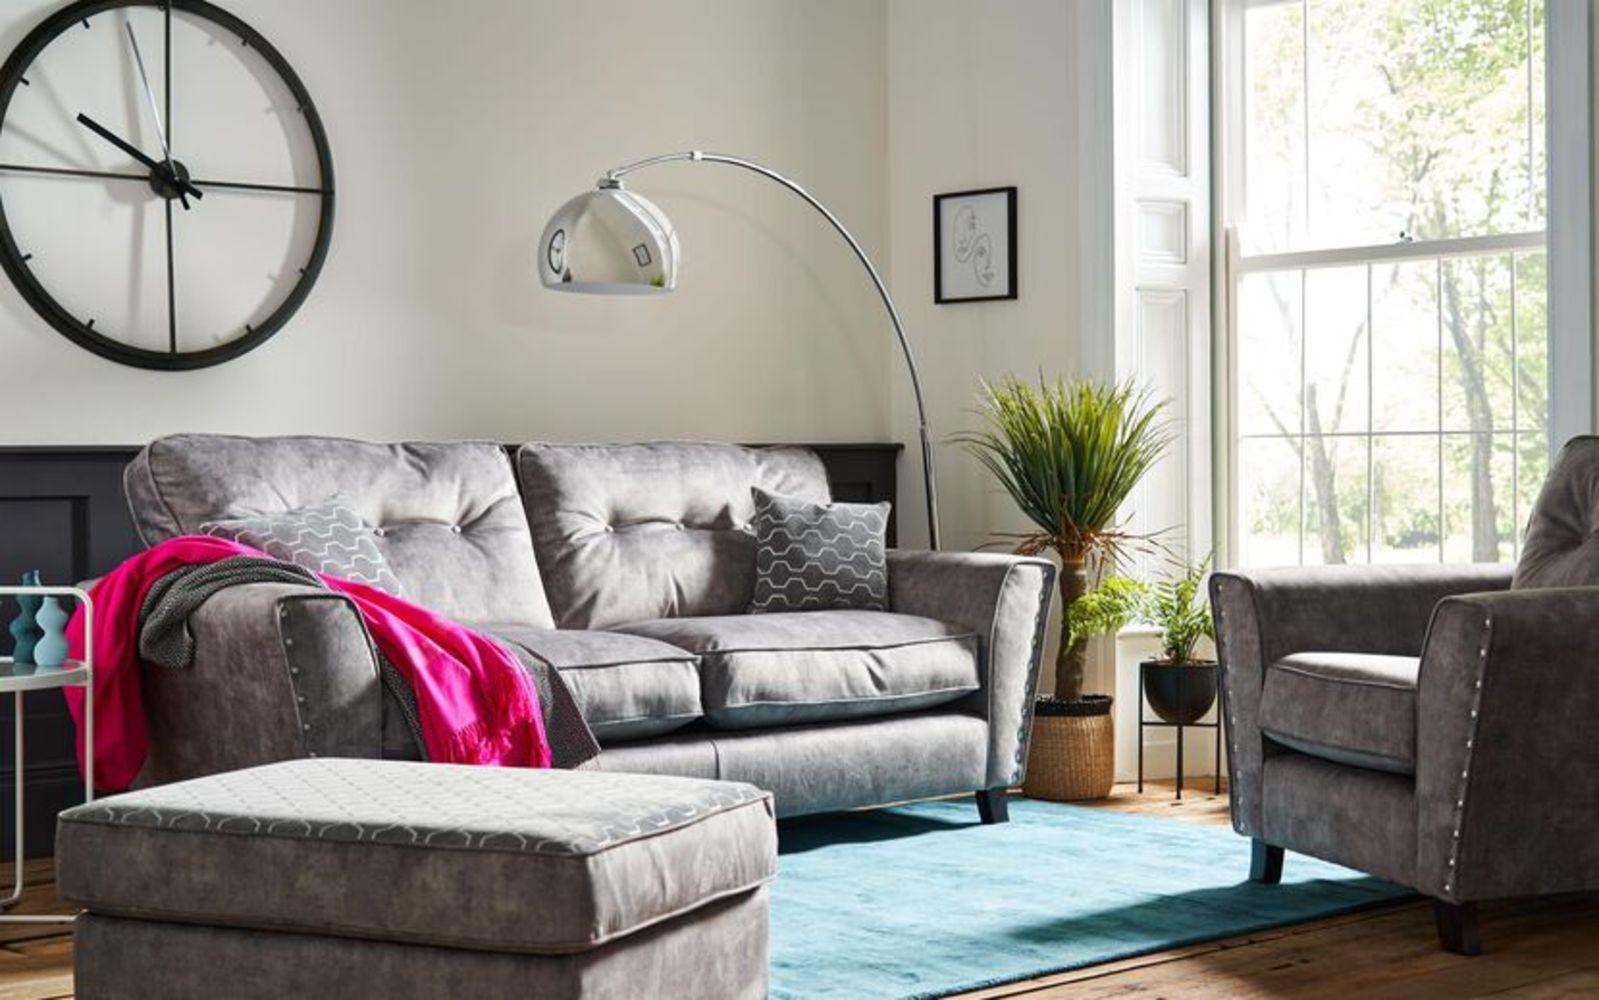 Over 59 lots of Sofas, footstools and Armchairs at up to 85% off RRP from SCS, Oak furniture land, John Lewis and more